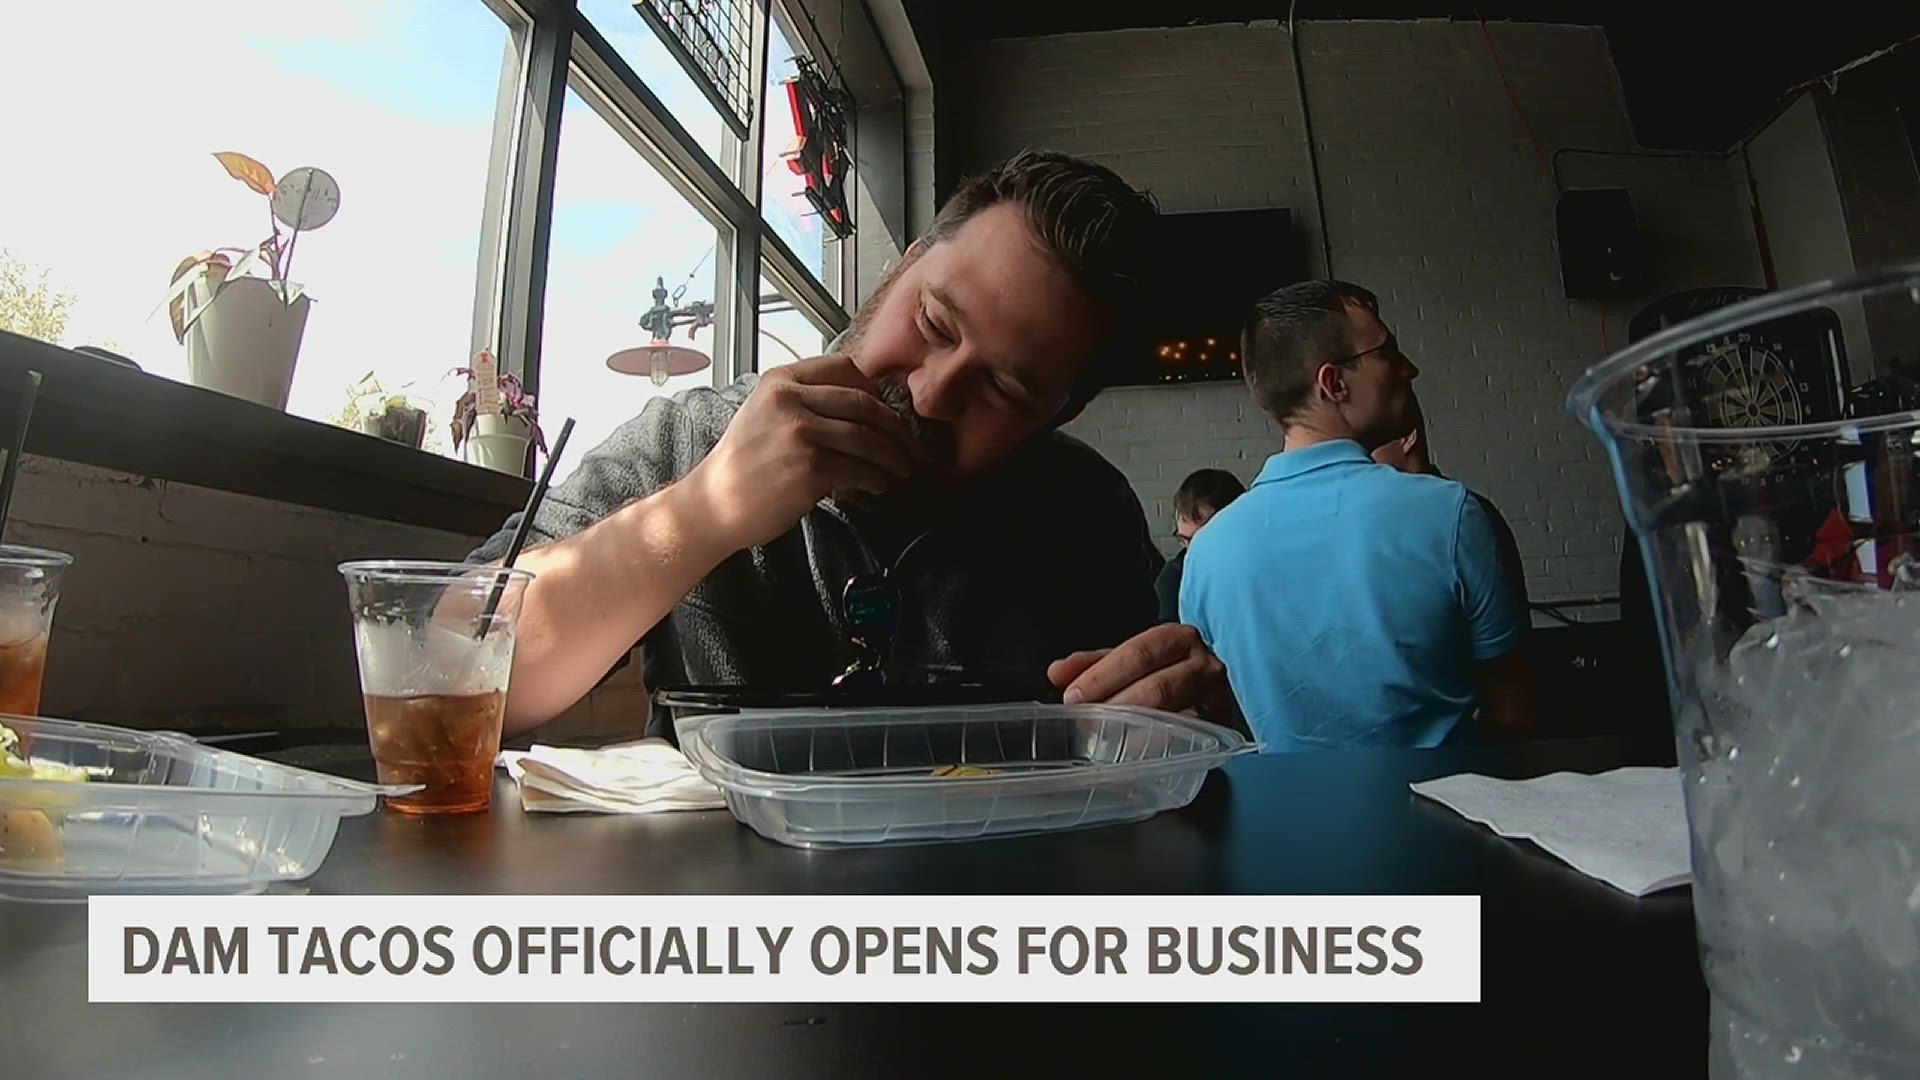 Owner Bill Sheeder says he doesn't want to reinvent the taco but wants to create a fun environment for all to enjoy